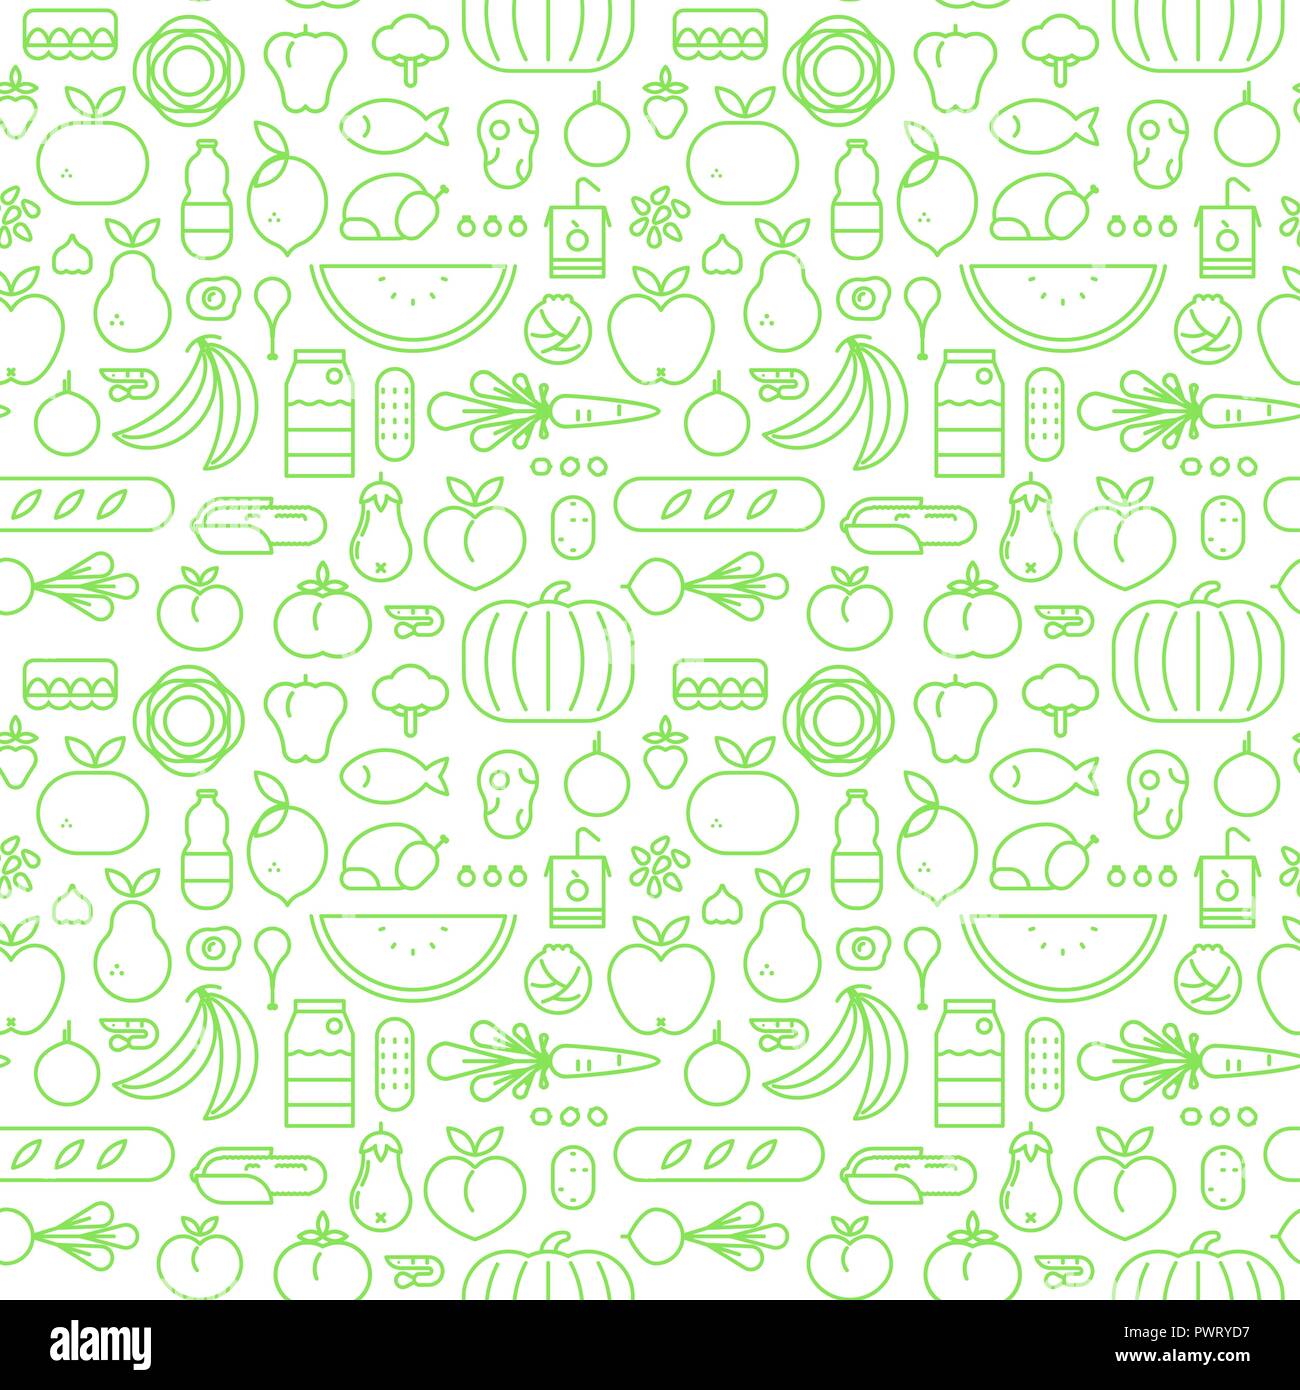 Food icon seamless pattern with green outline symbols. Healthy